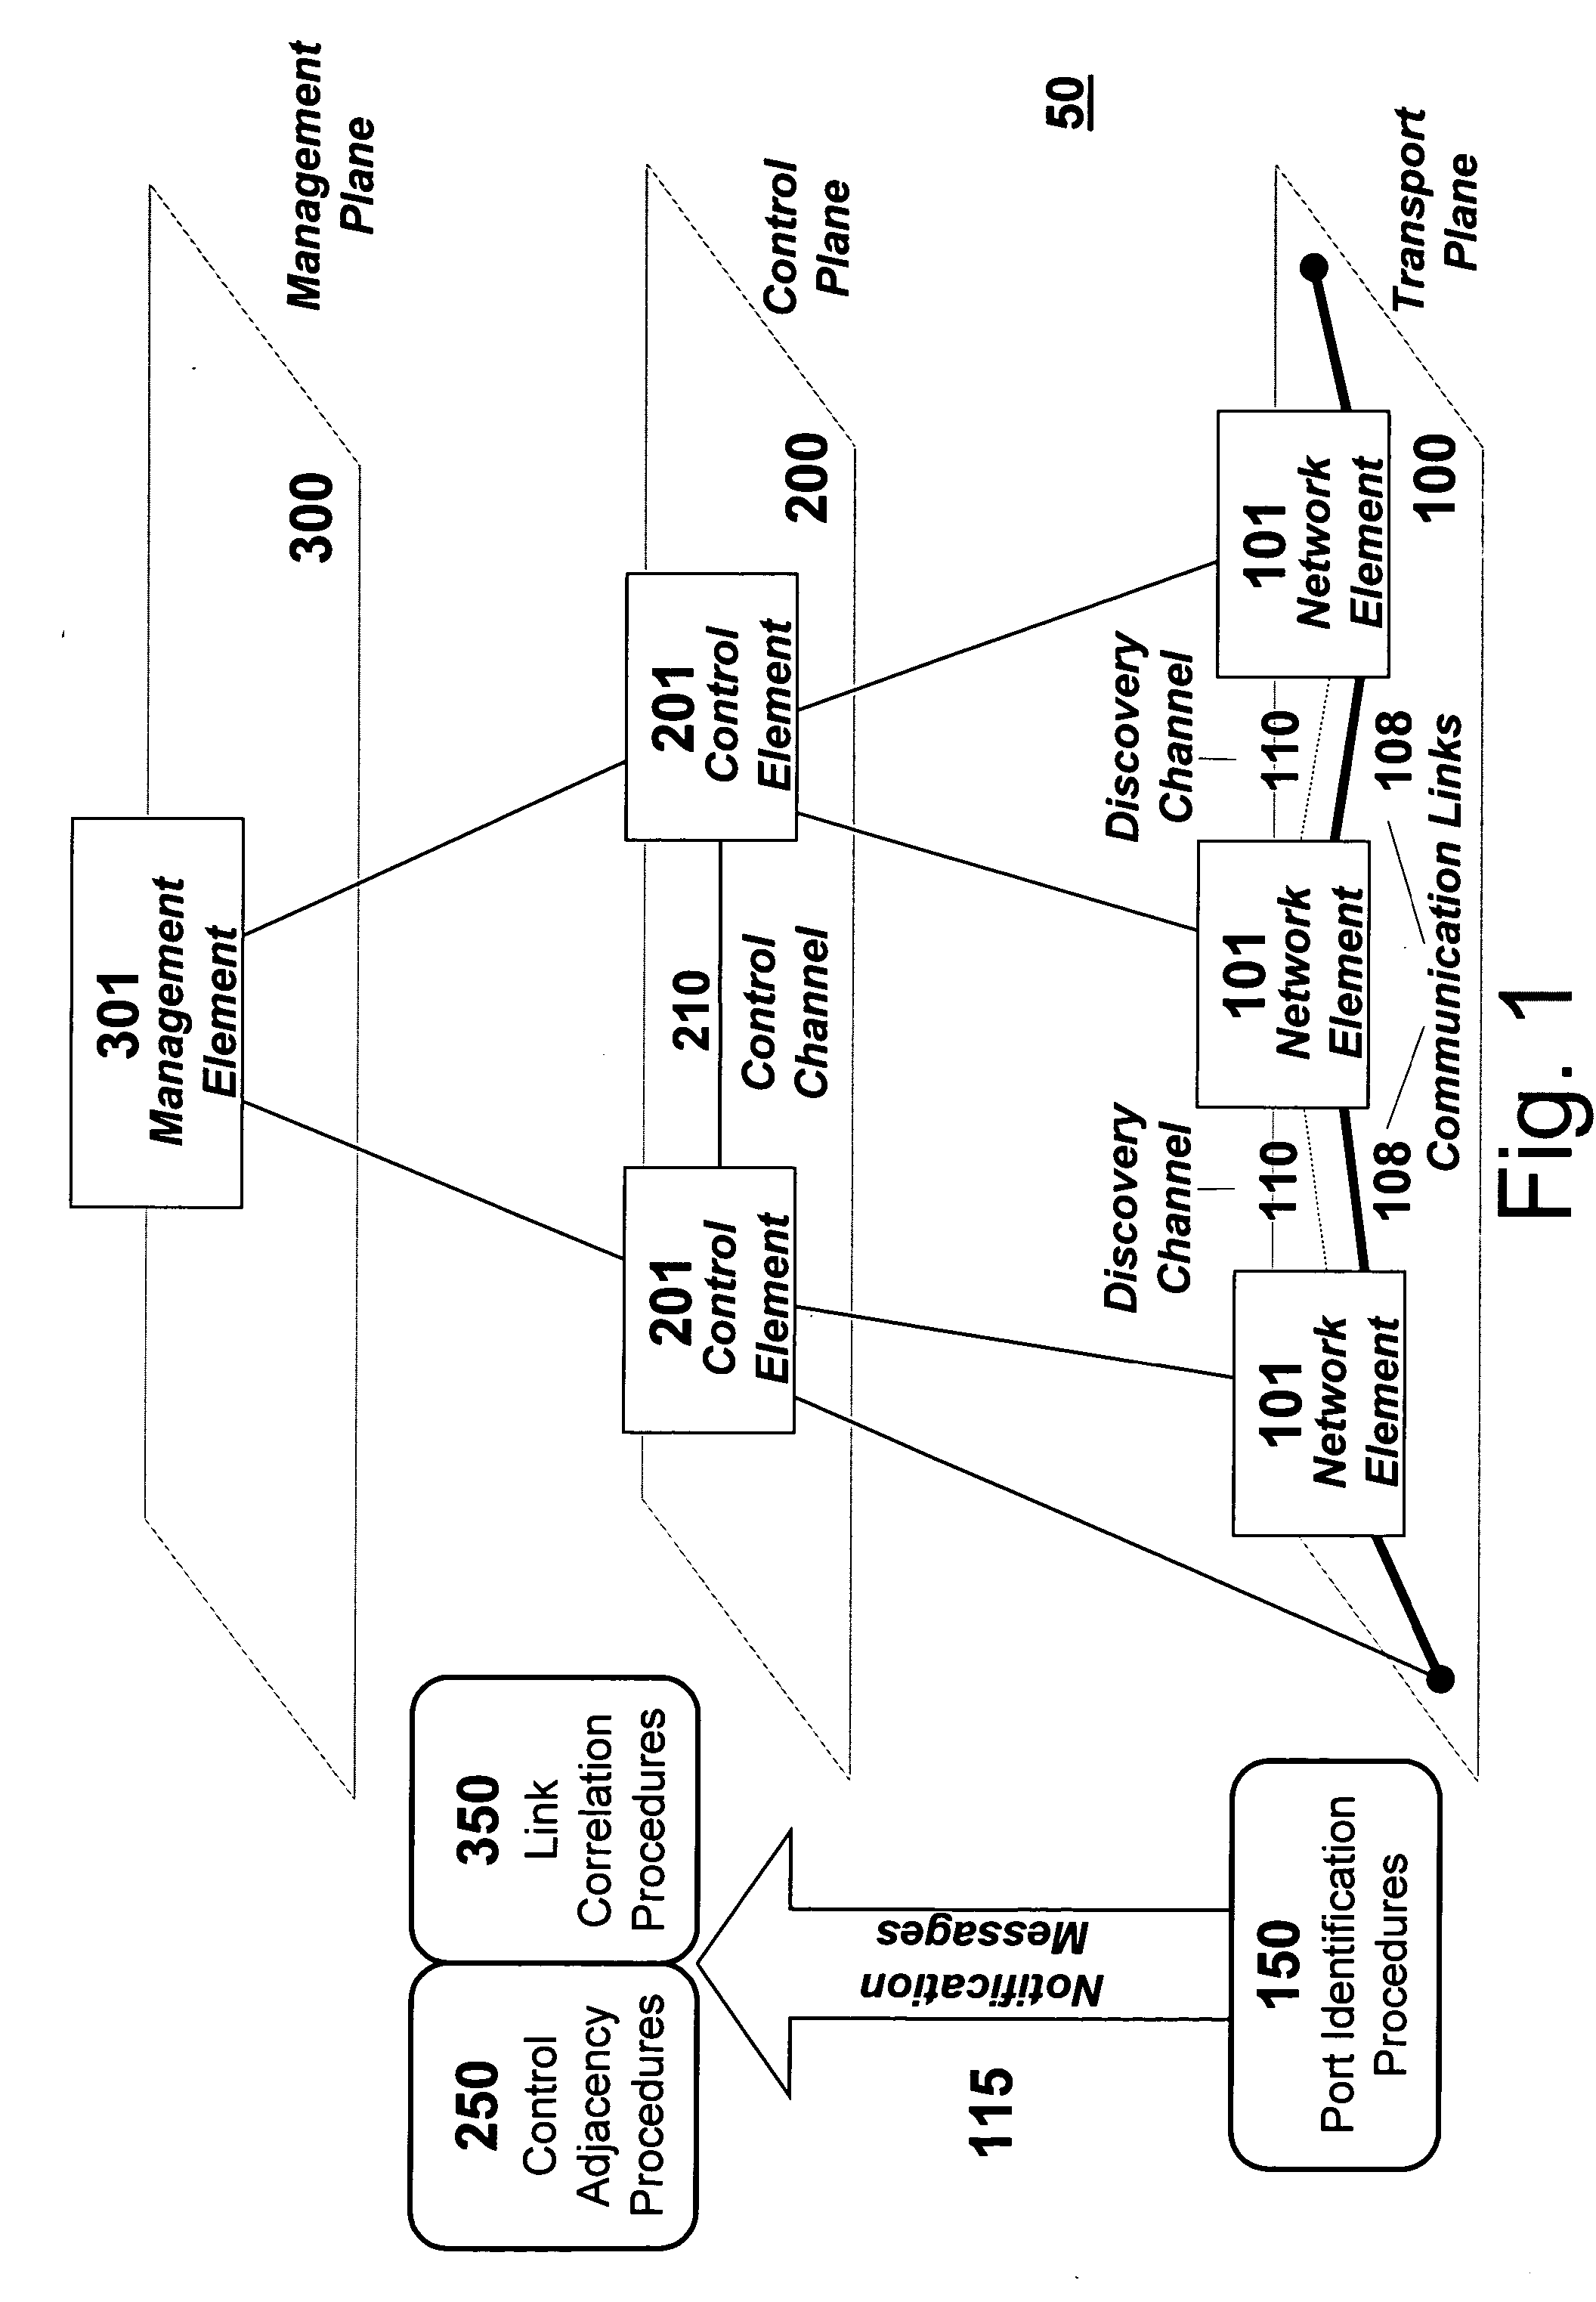 Method and system for autonomous link discovery and network management connectivity of remote access devices